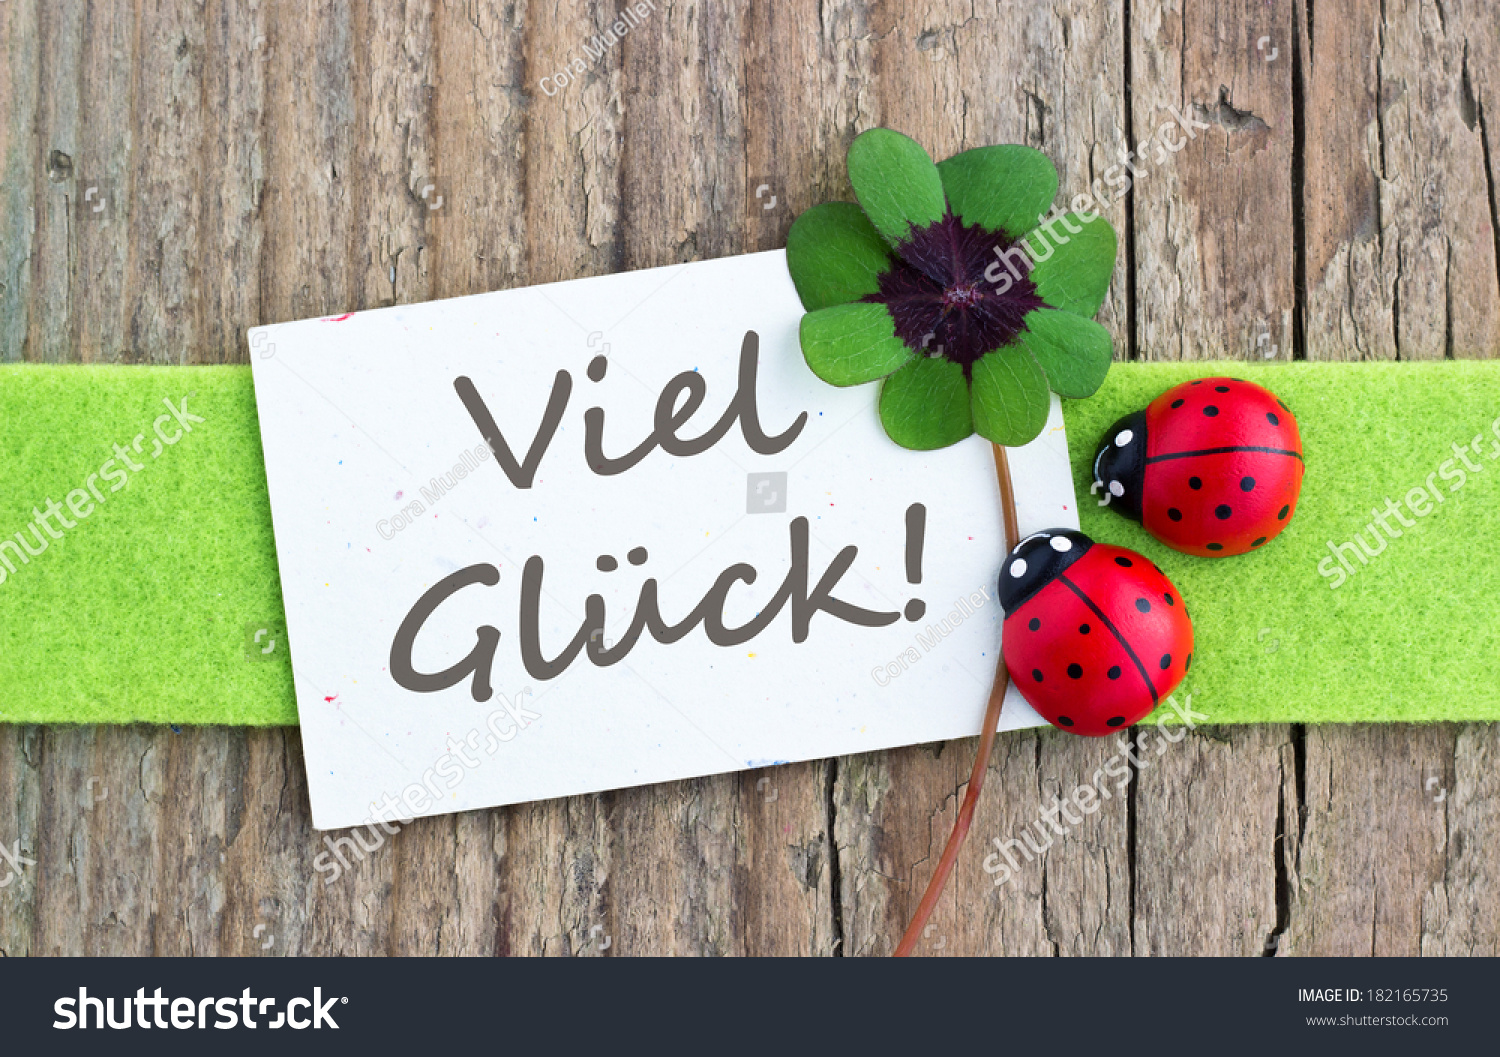 stock-photo-leafed-clover-ladybugs-and-card-on-wooden-board-good-luck-german-182165735.jpg